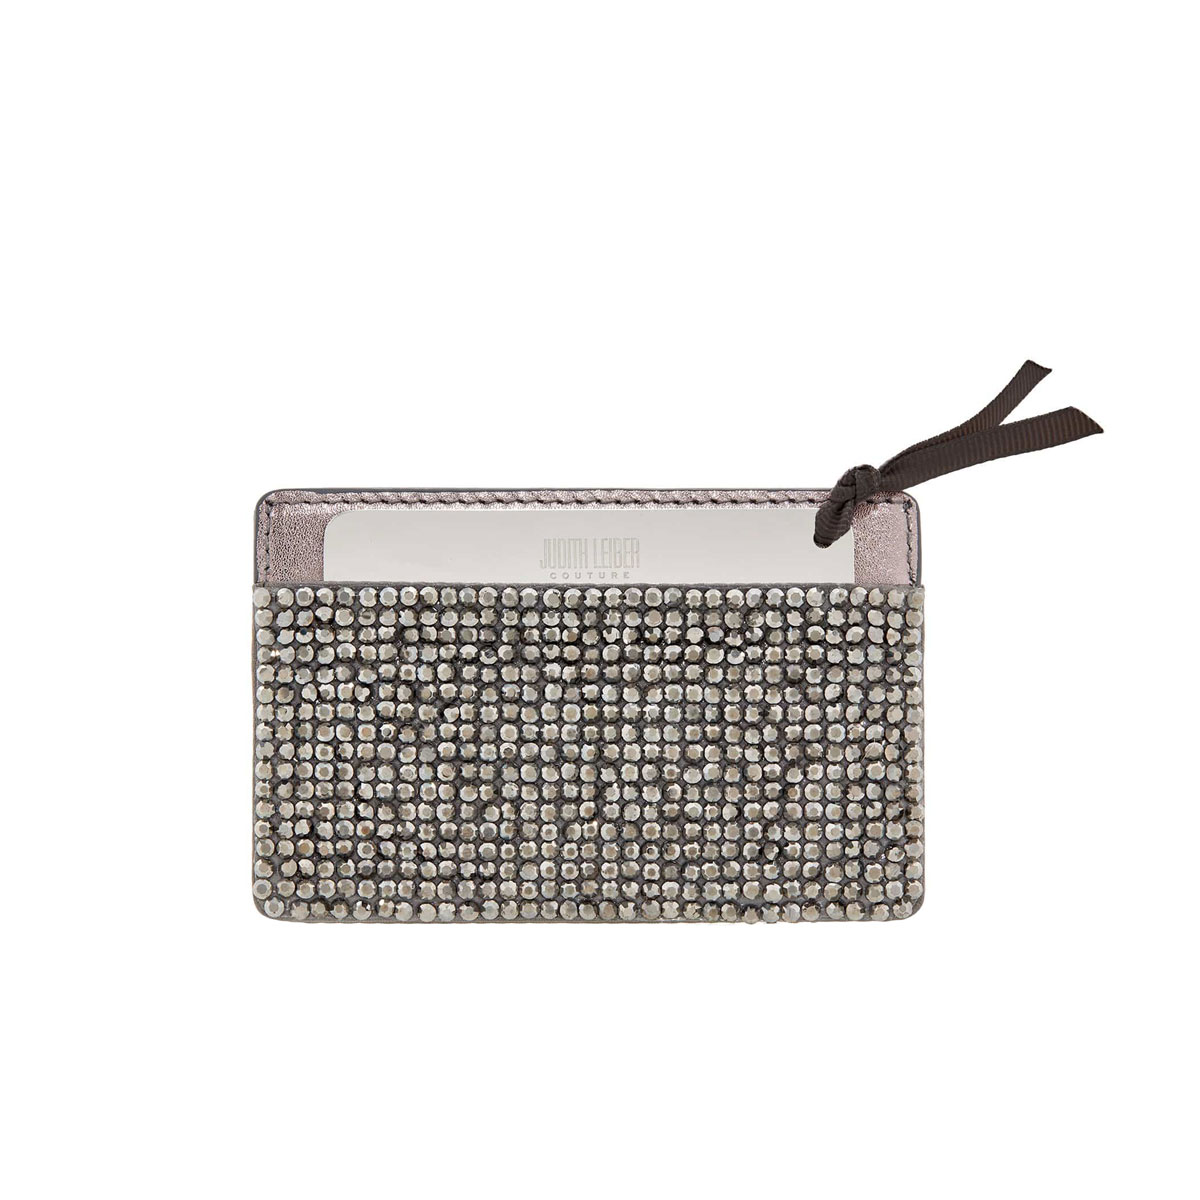 Judith Leiber Couture Women's Billions Envelope Crystal Clutch